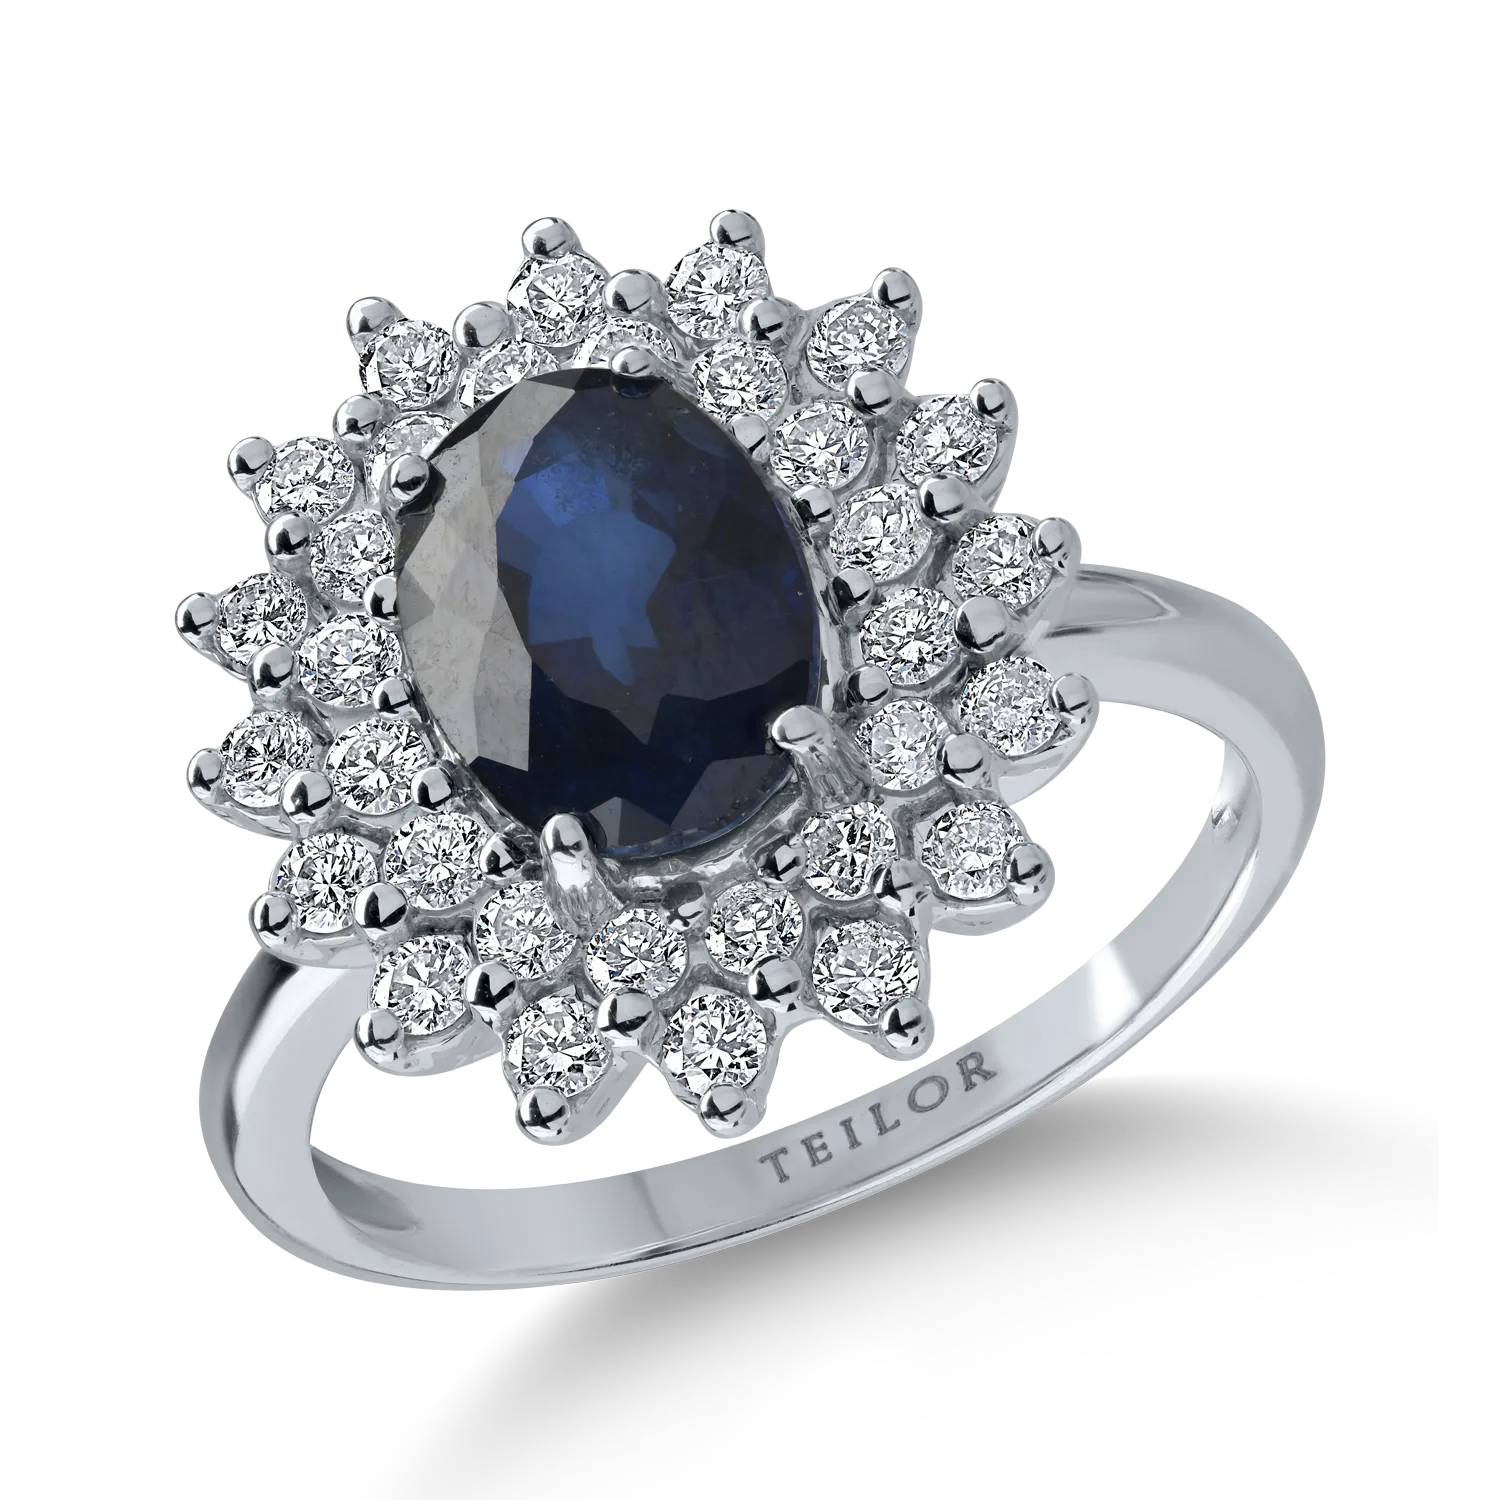 White gold ring with 2.81ct sapphire and 0.69ct diamonds